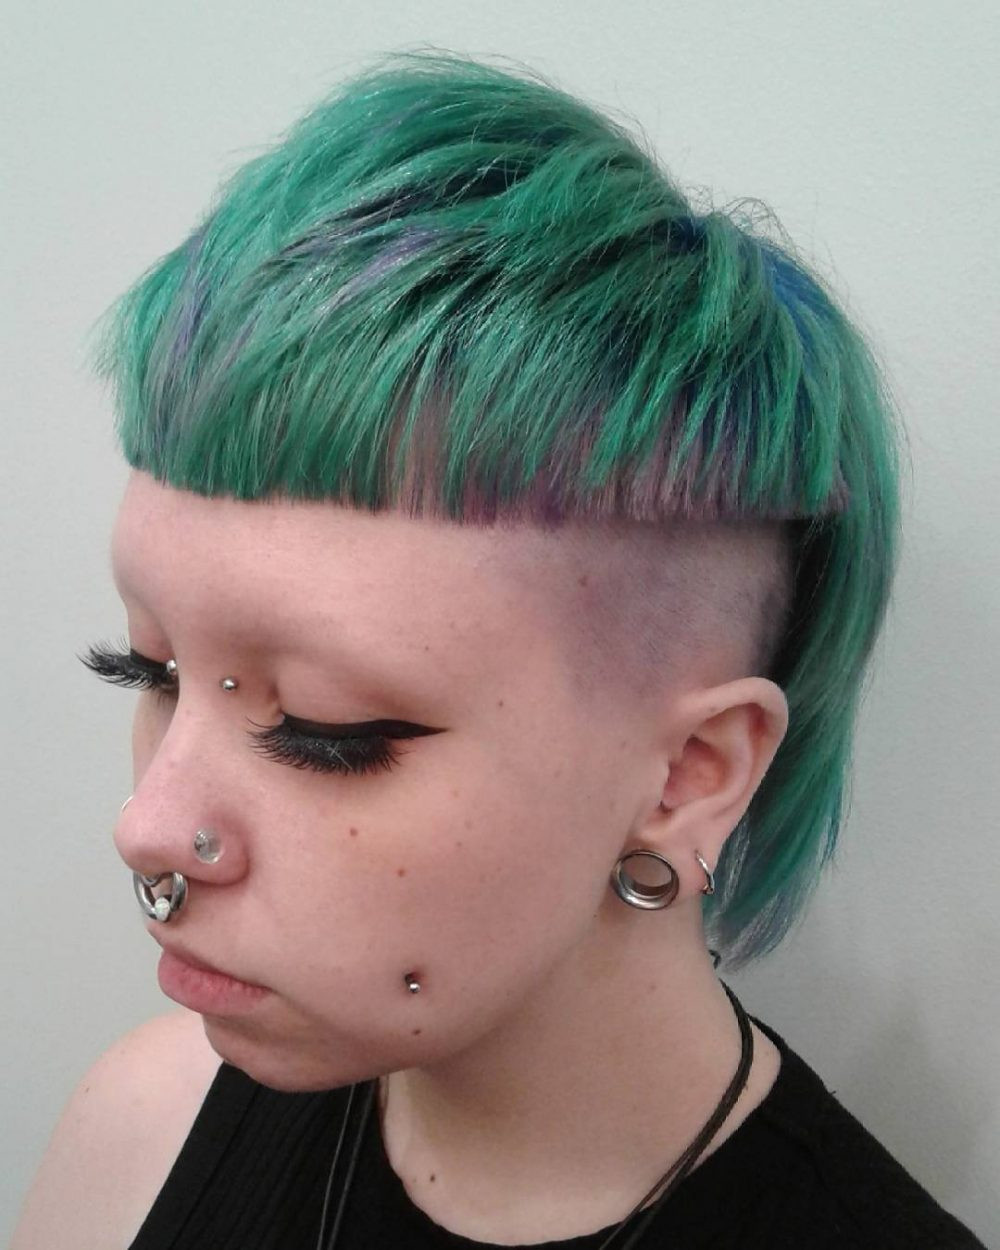 Punk Girly Hairstyles
 31 Punk Hairstyles Like You’ve Never Seen Before